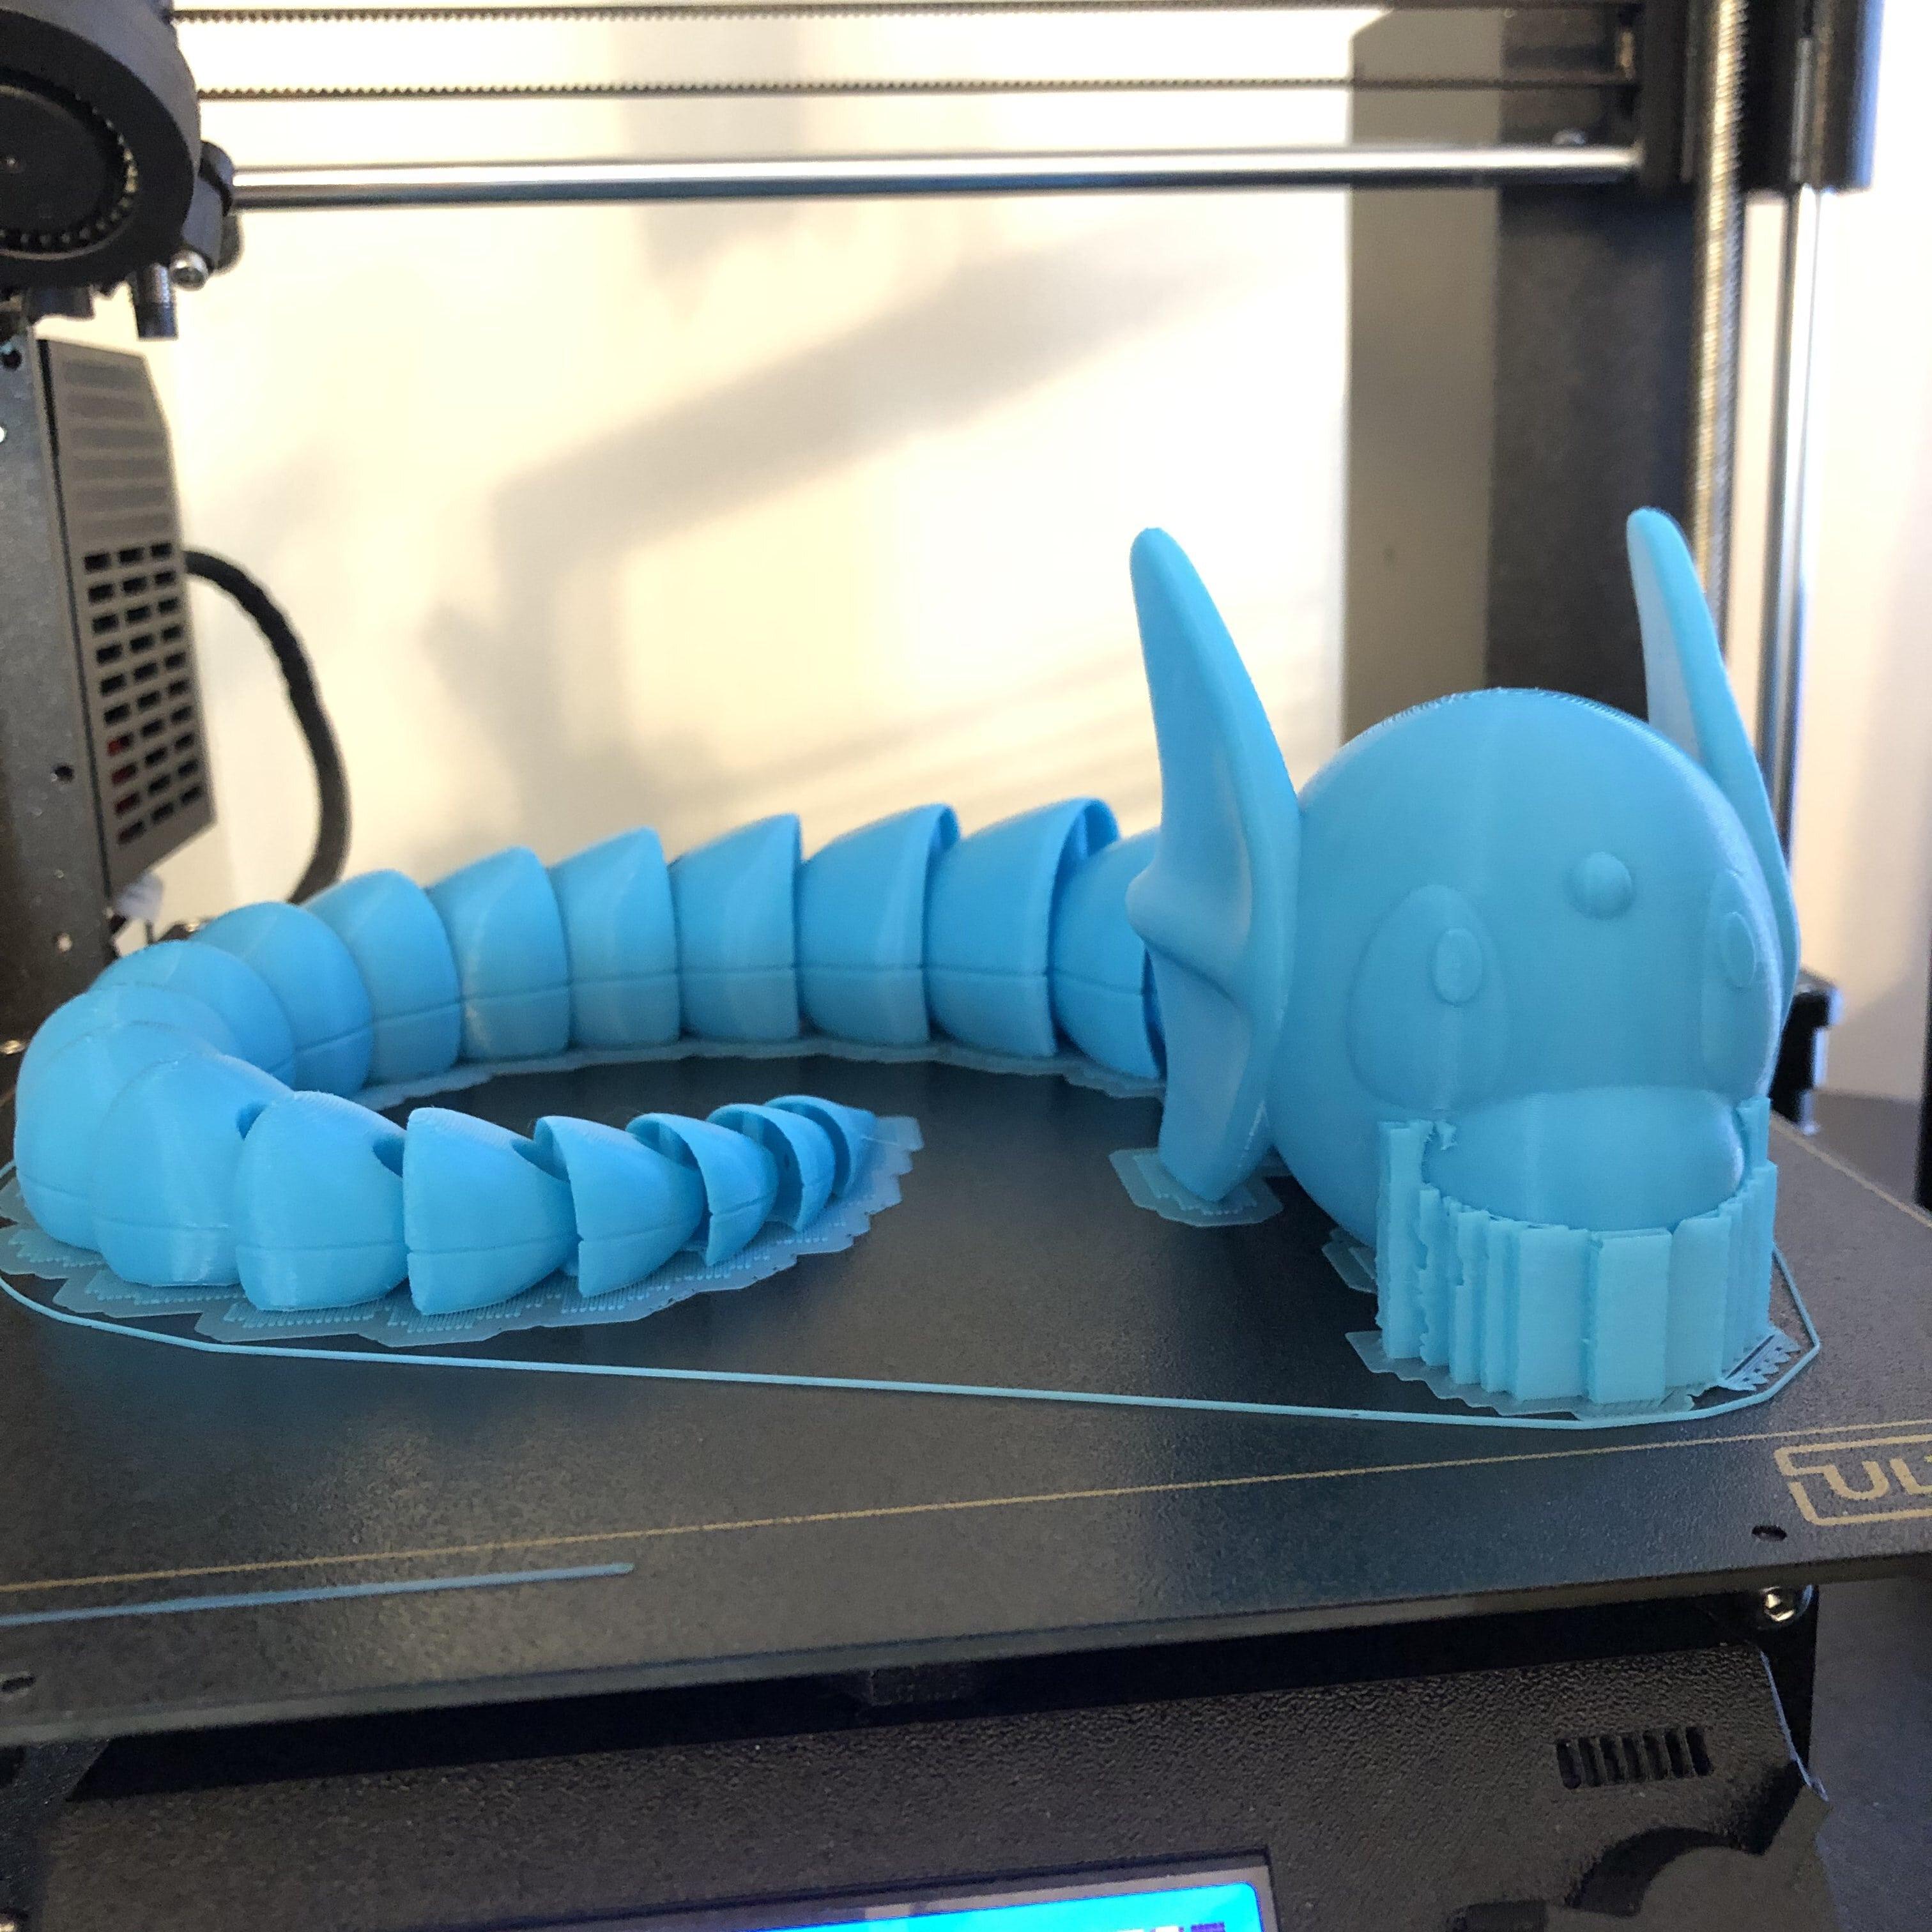 Dratini (Pokemon) - Dratini printed on Prusa Mk3s. .2mm layer height and a .4mm nozzle. Printed in Matterhackers Light Blue PLA. - 3d model